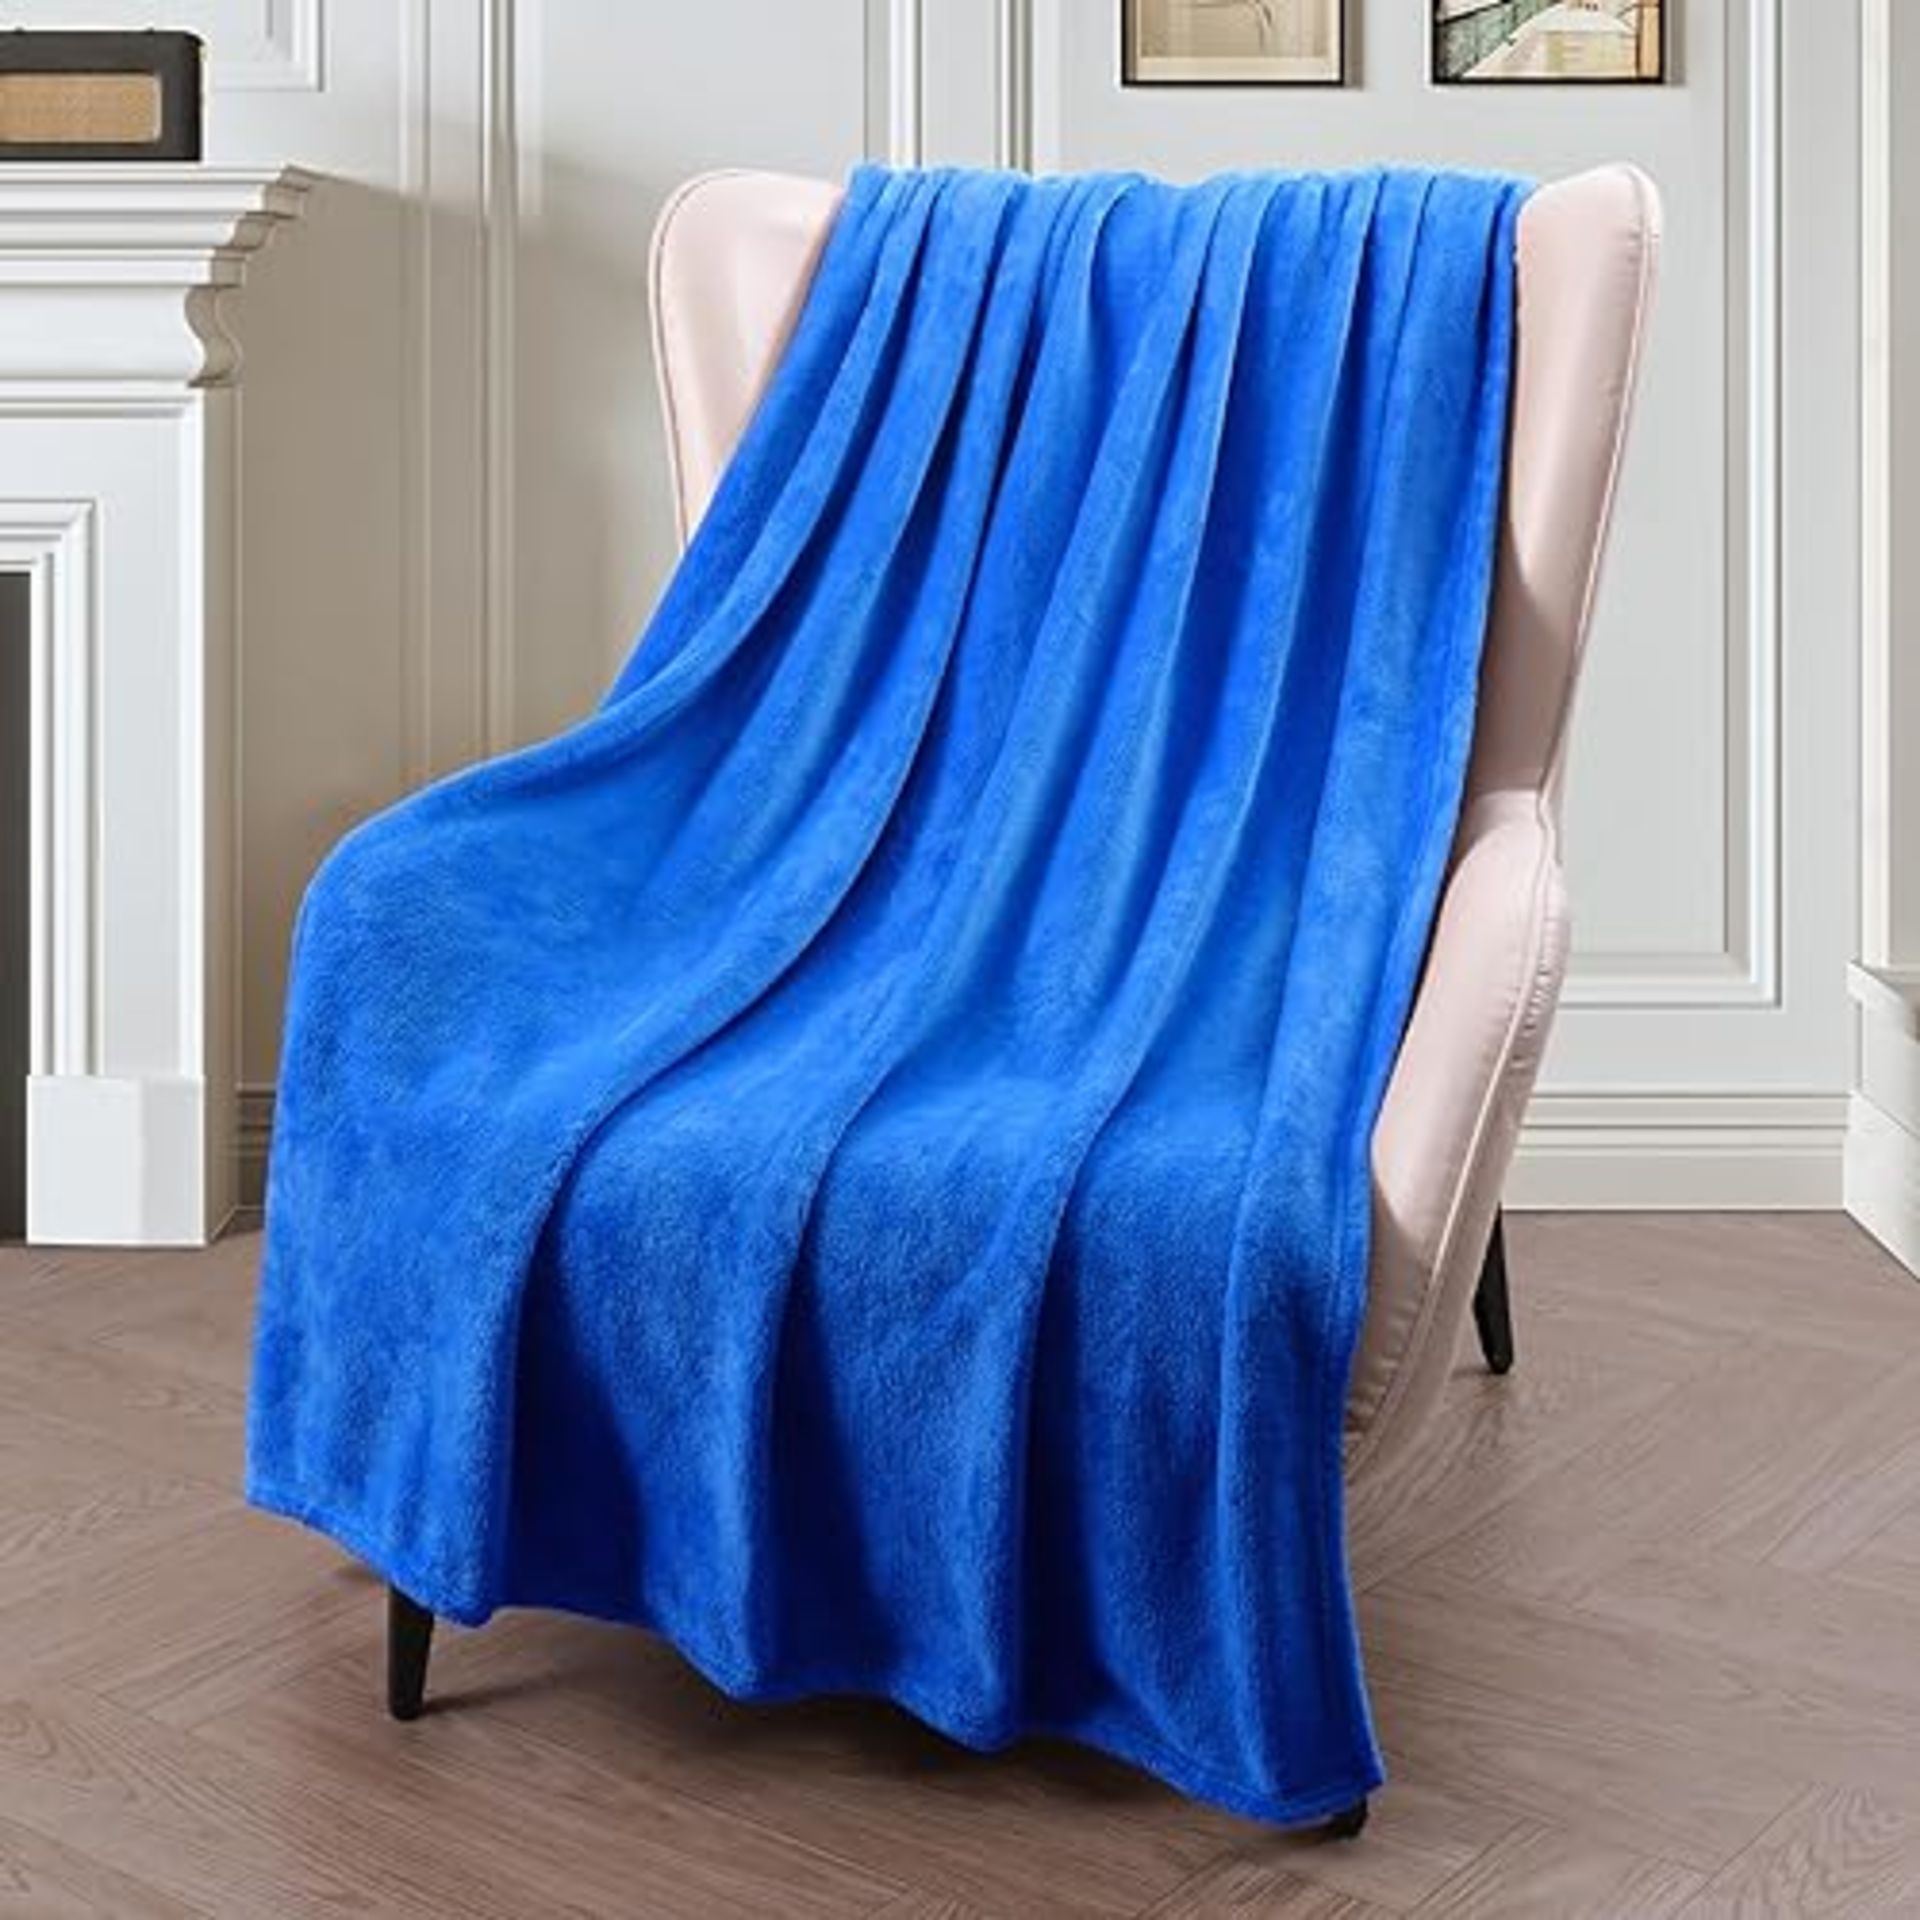 Exclusivo Mezcla Throw Blanket for Couch, Sofa, Settees and Chairs, 127 x 178 CM Flannel Blanket, 3